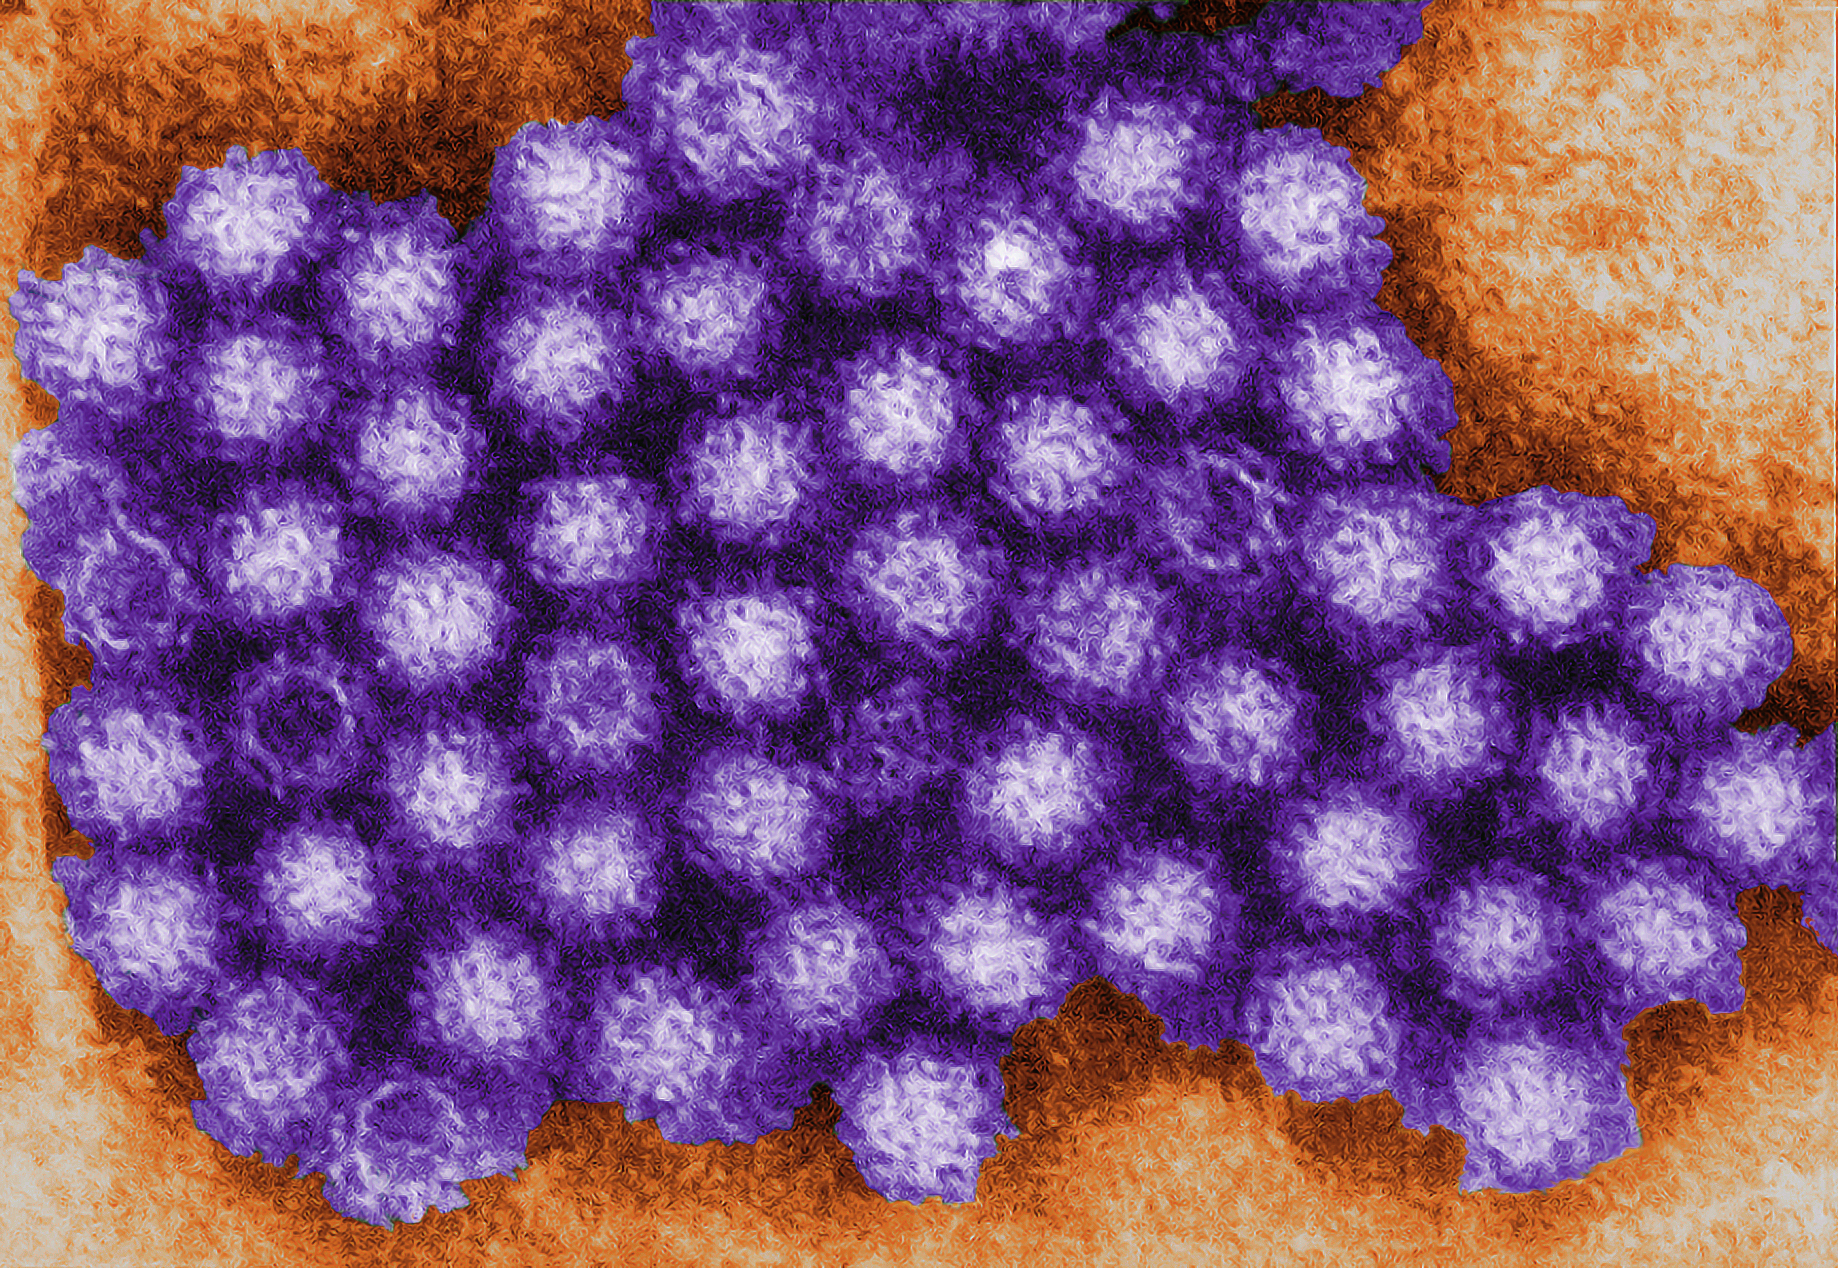 Transmission electron micrograph reveals norovirus virions, or virus particles.